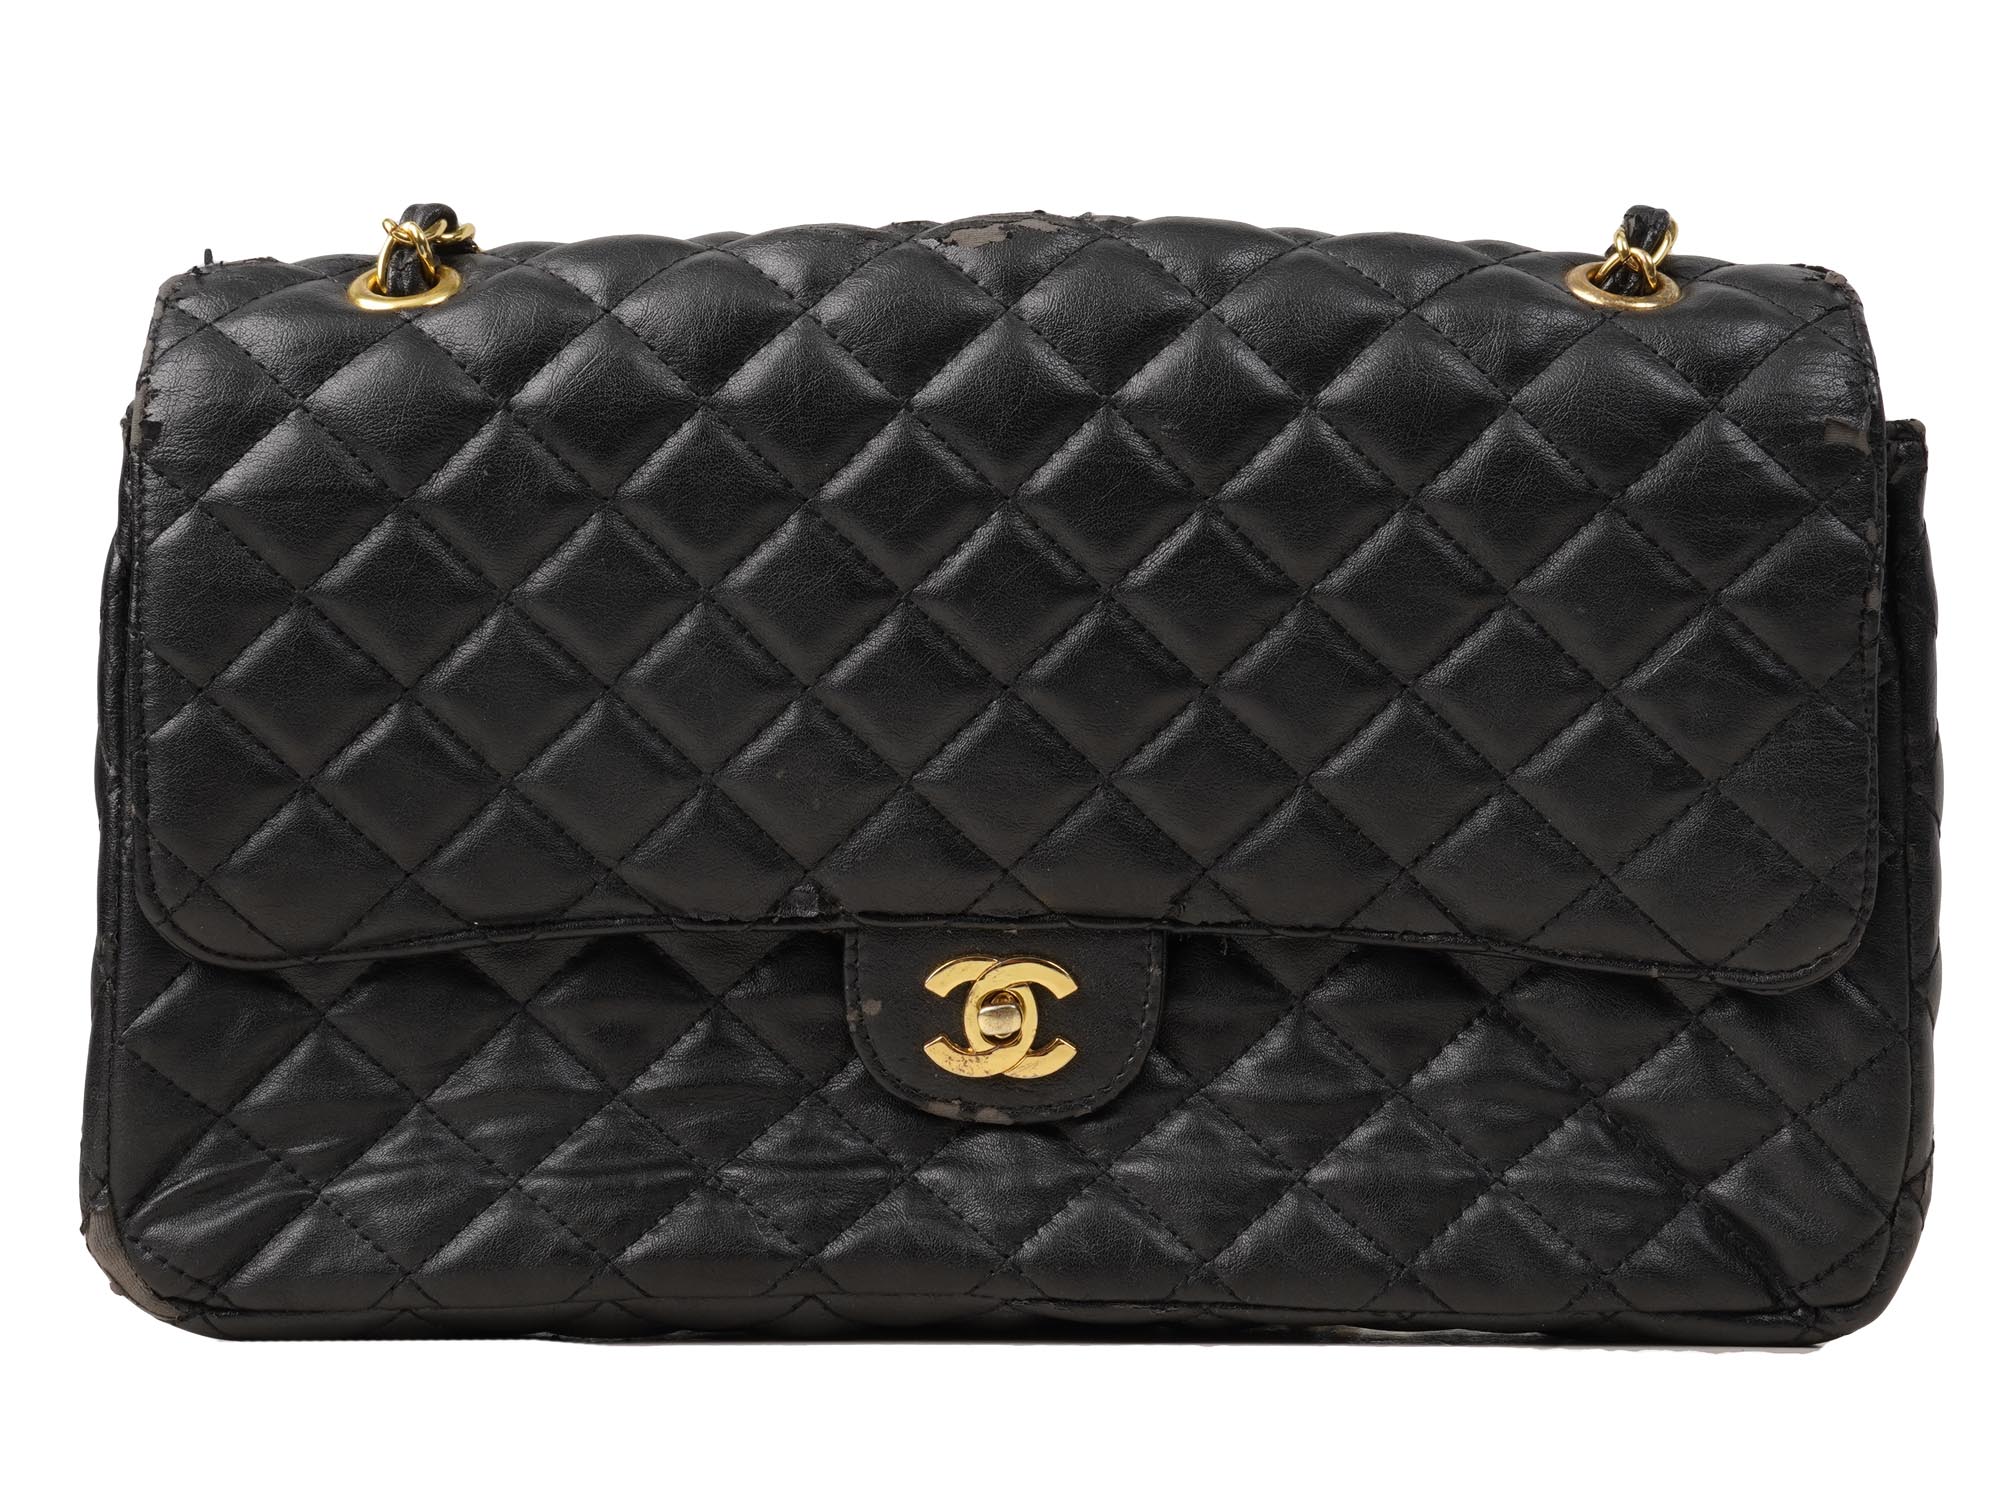 CHANEL STYLE FLAP QUILTED BLACK LEATHER BAG PURSE PIC-1